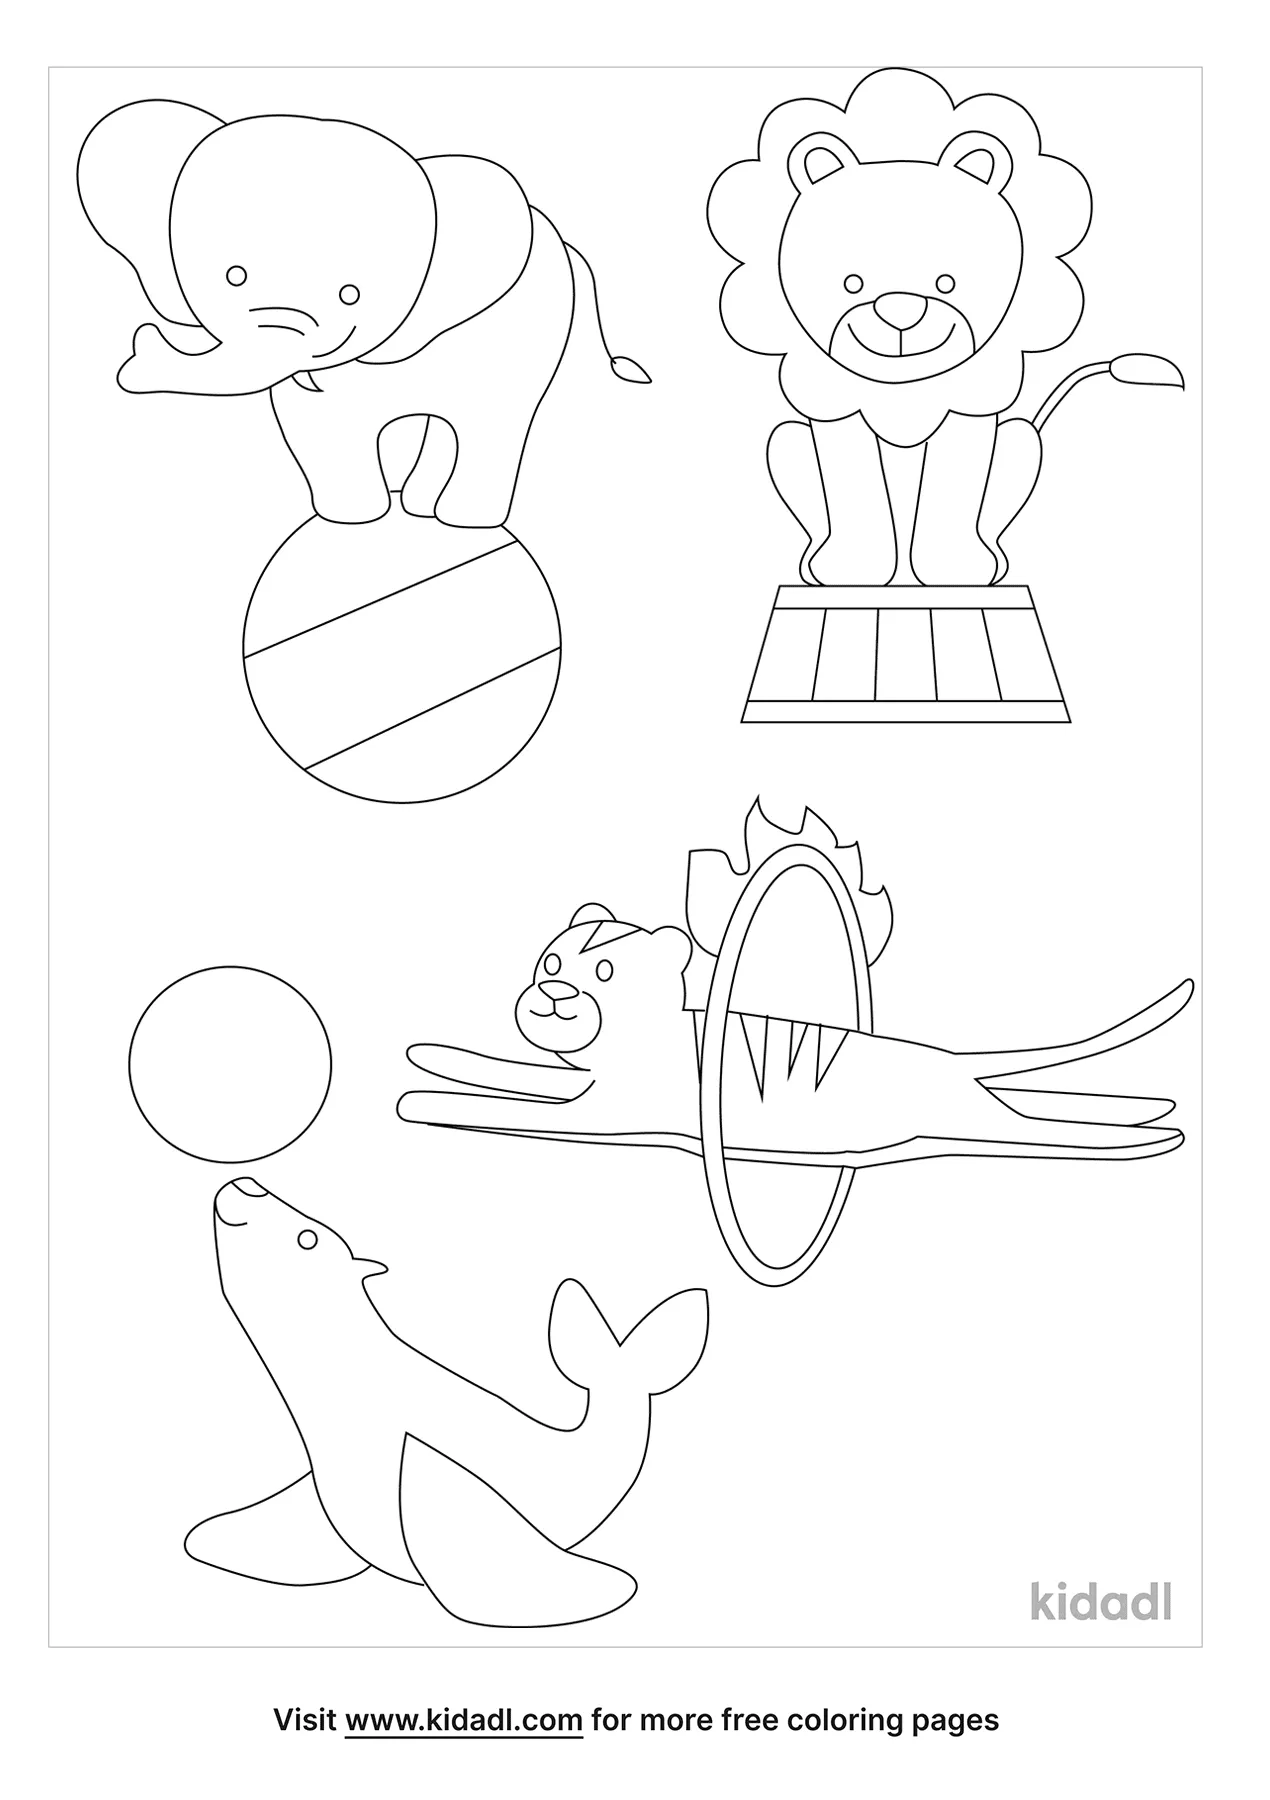 Free Circus Animals Coloring Page | Coloring Page Printables | Kidadl